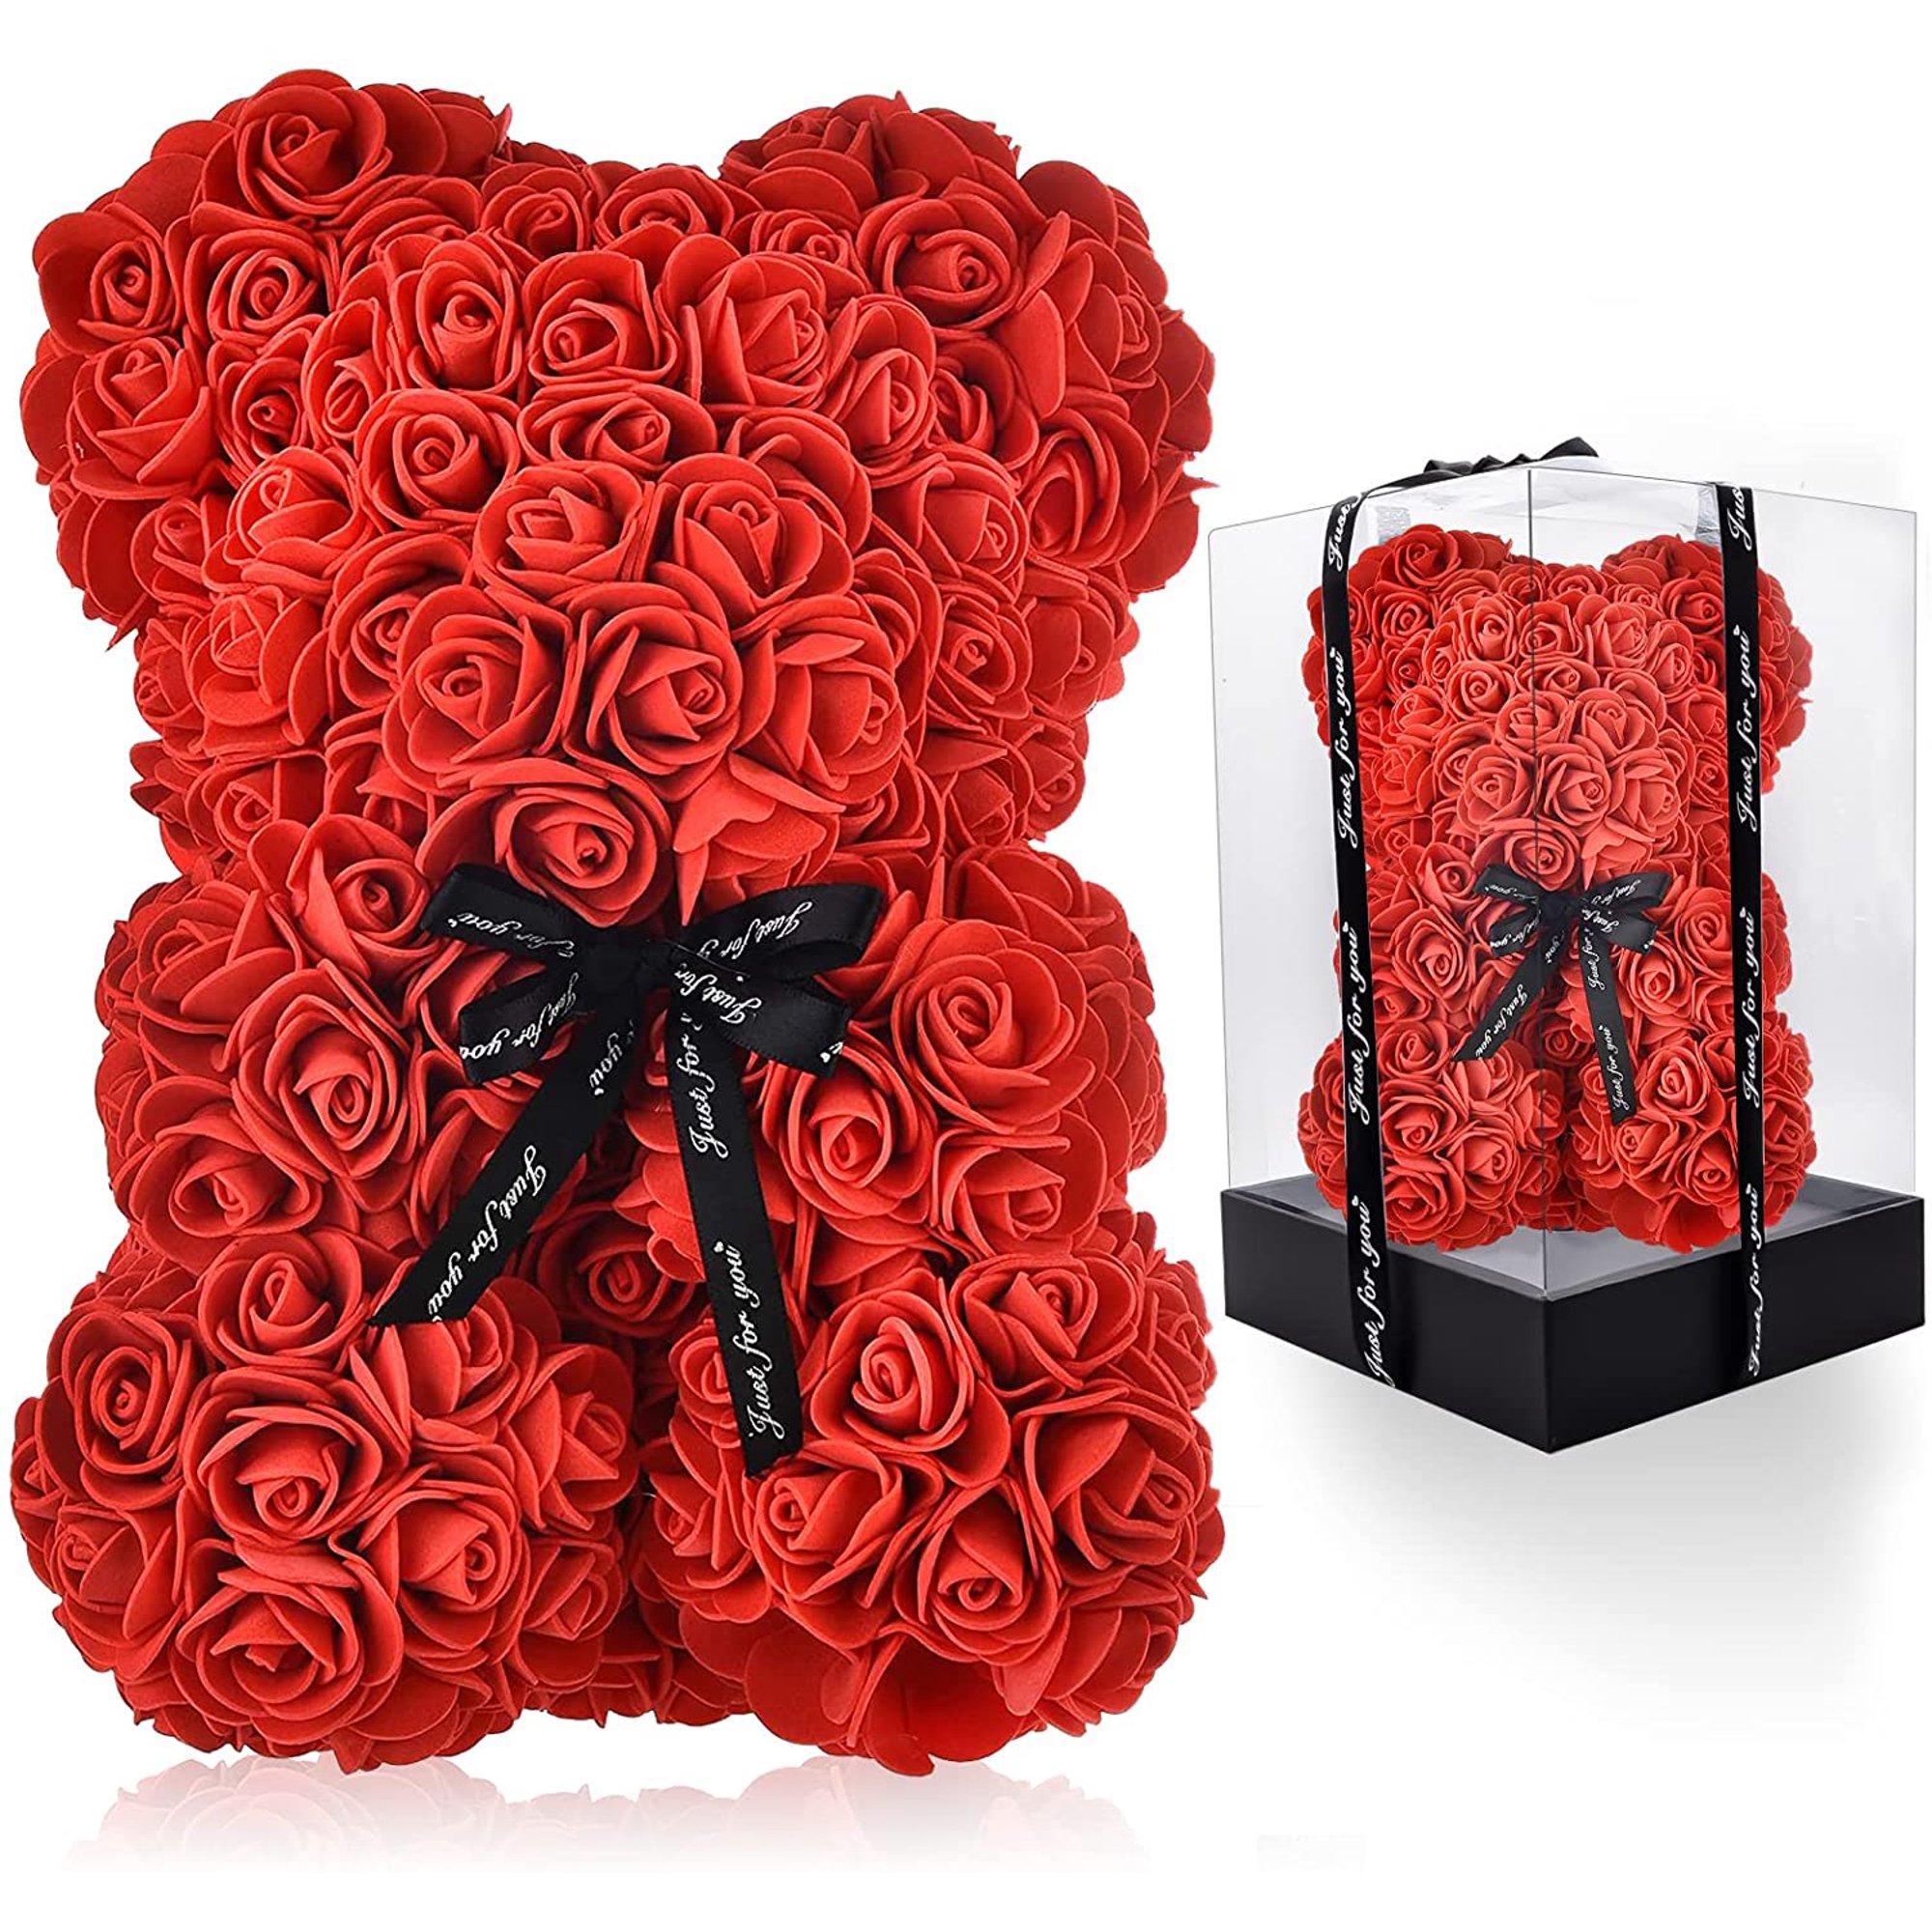 Madala Rose Bear with Box 10 inch, Valentines Day Gifts for Her Him, Red Artificial Flower Bear Gifts for Grandma, Mom, Mothers Day, Birthday - image 1 of 7